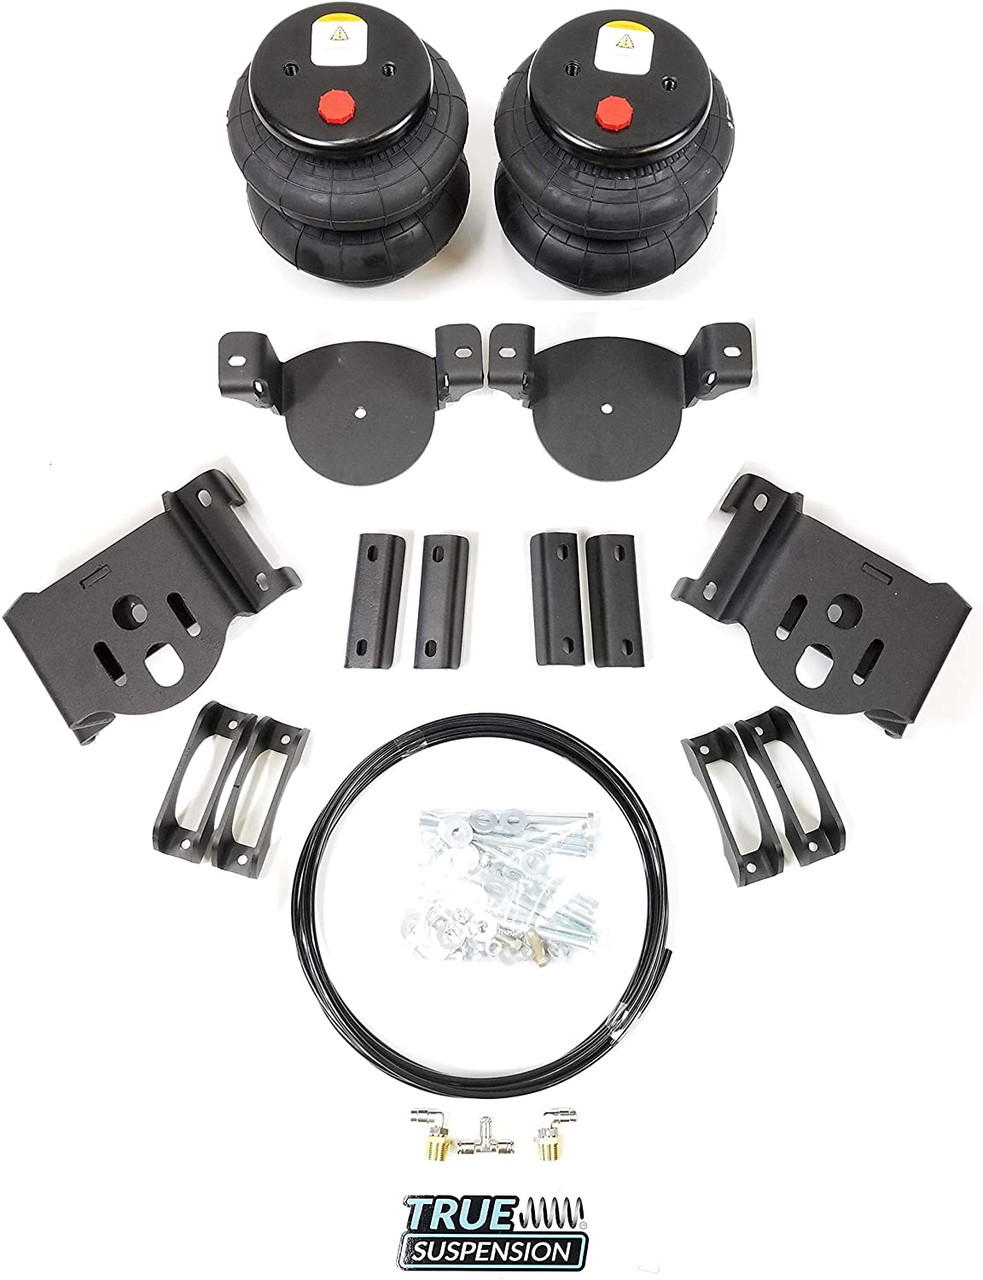 Compatible with Nissan Frontier 05-20 Truck Pickup Rear Towing Assist Helper Air Ride Suspension Kit 2wd RWD